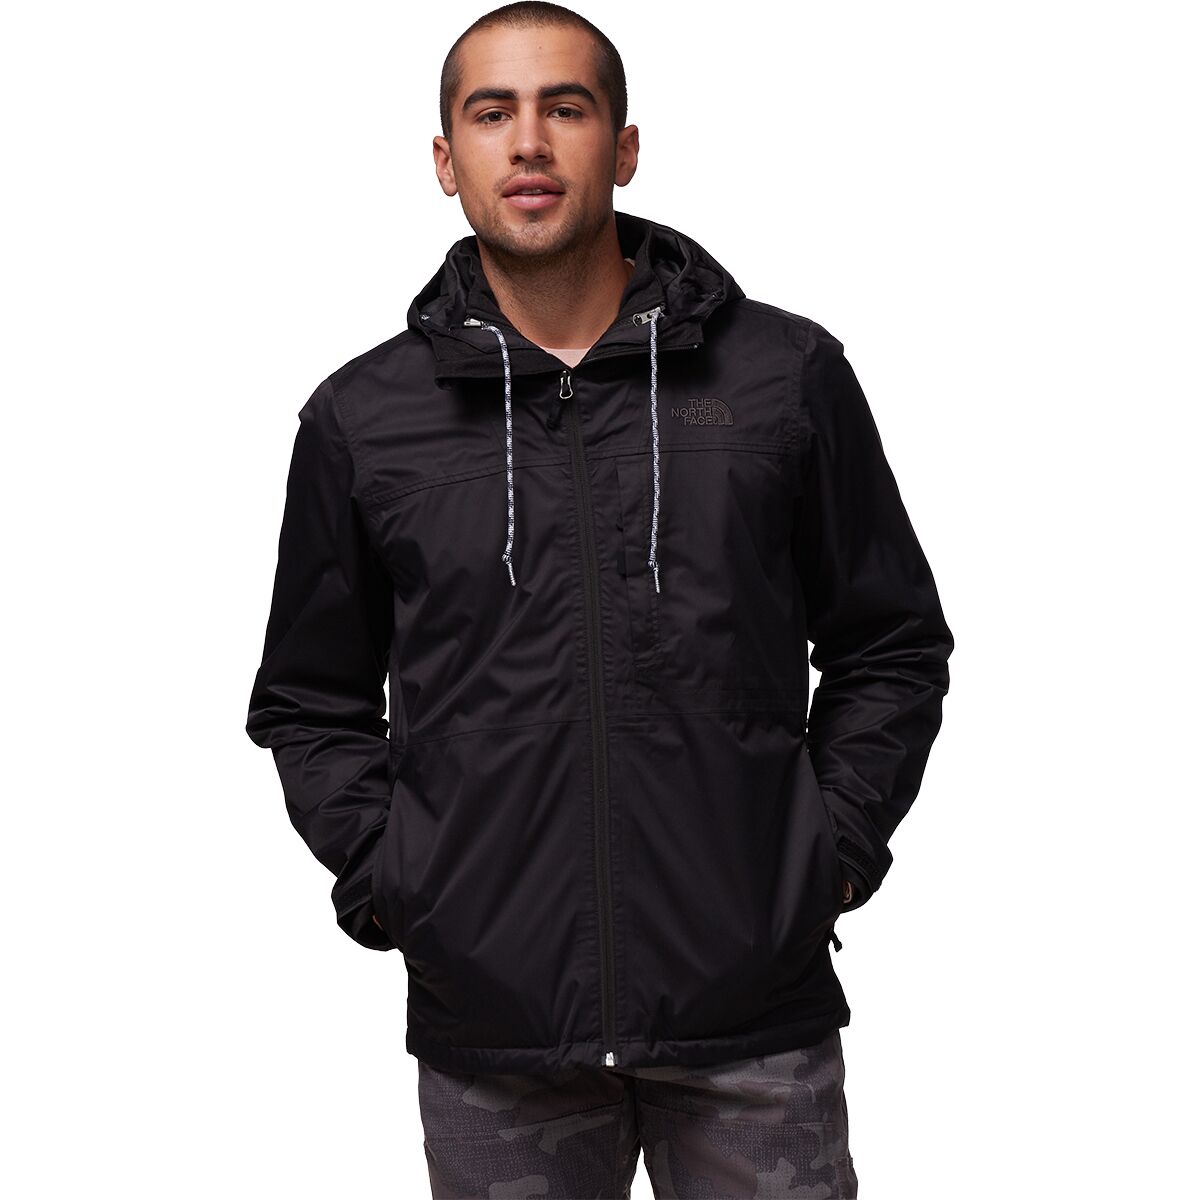 The North Face Arrowood Triclimate 3-in-1 Jacket - Men's - Clothing